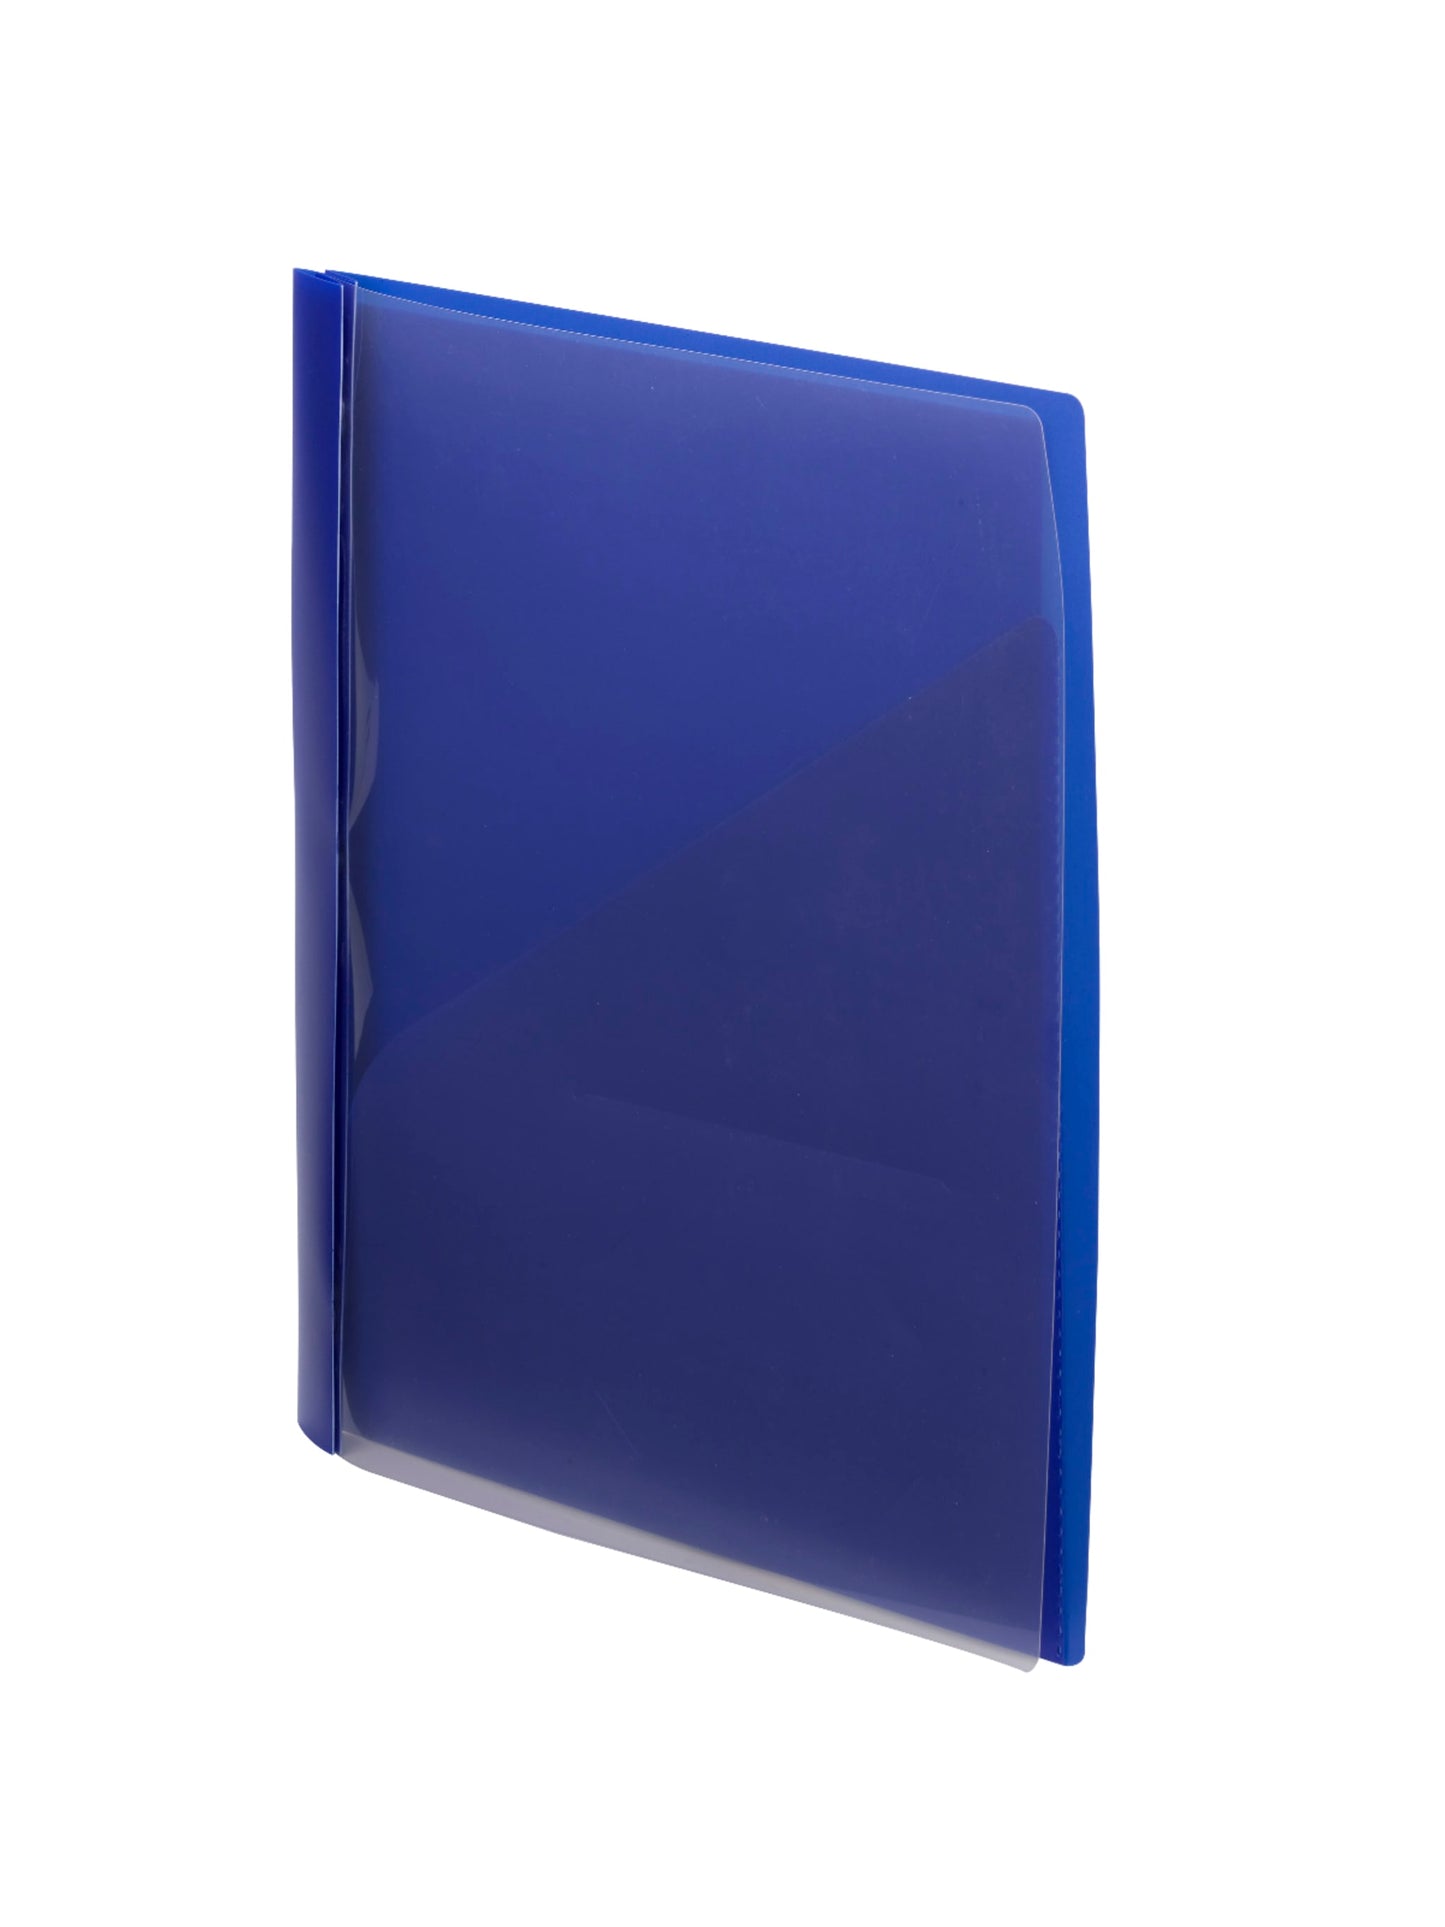 Poly Report Covers with Clear Front, Dark Blue Color, Letter Size, Set of 1, 086486860116